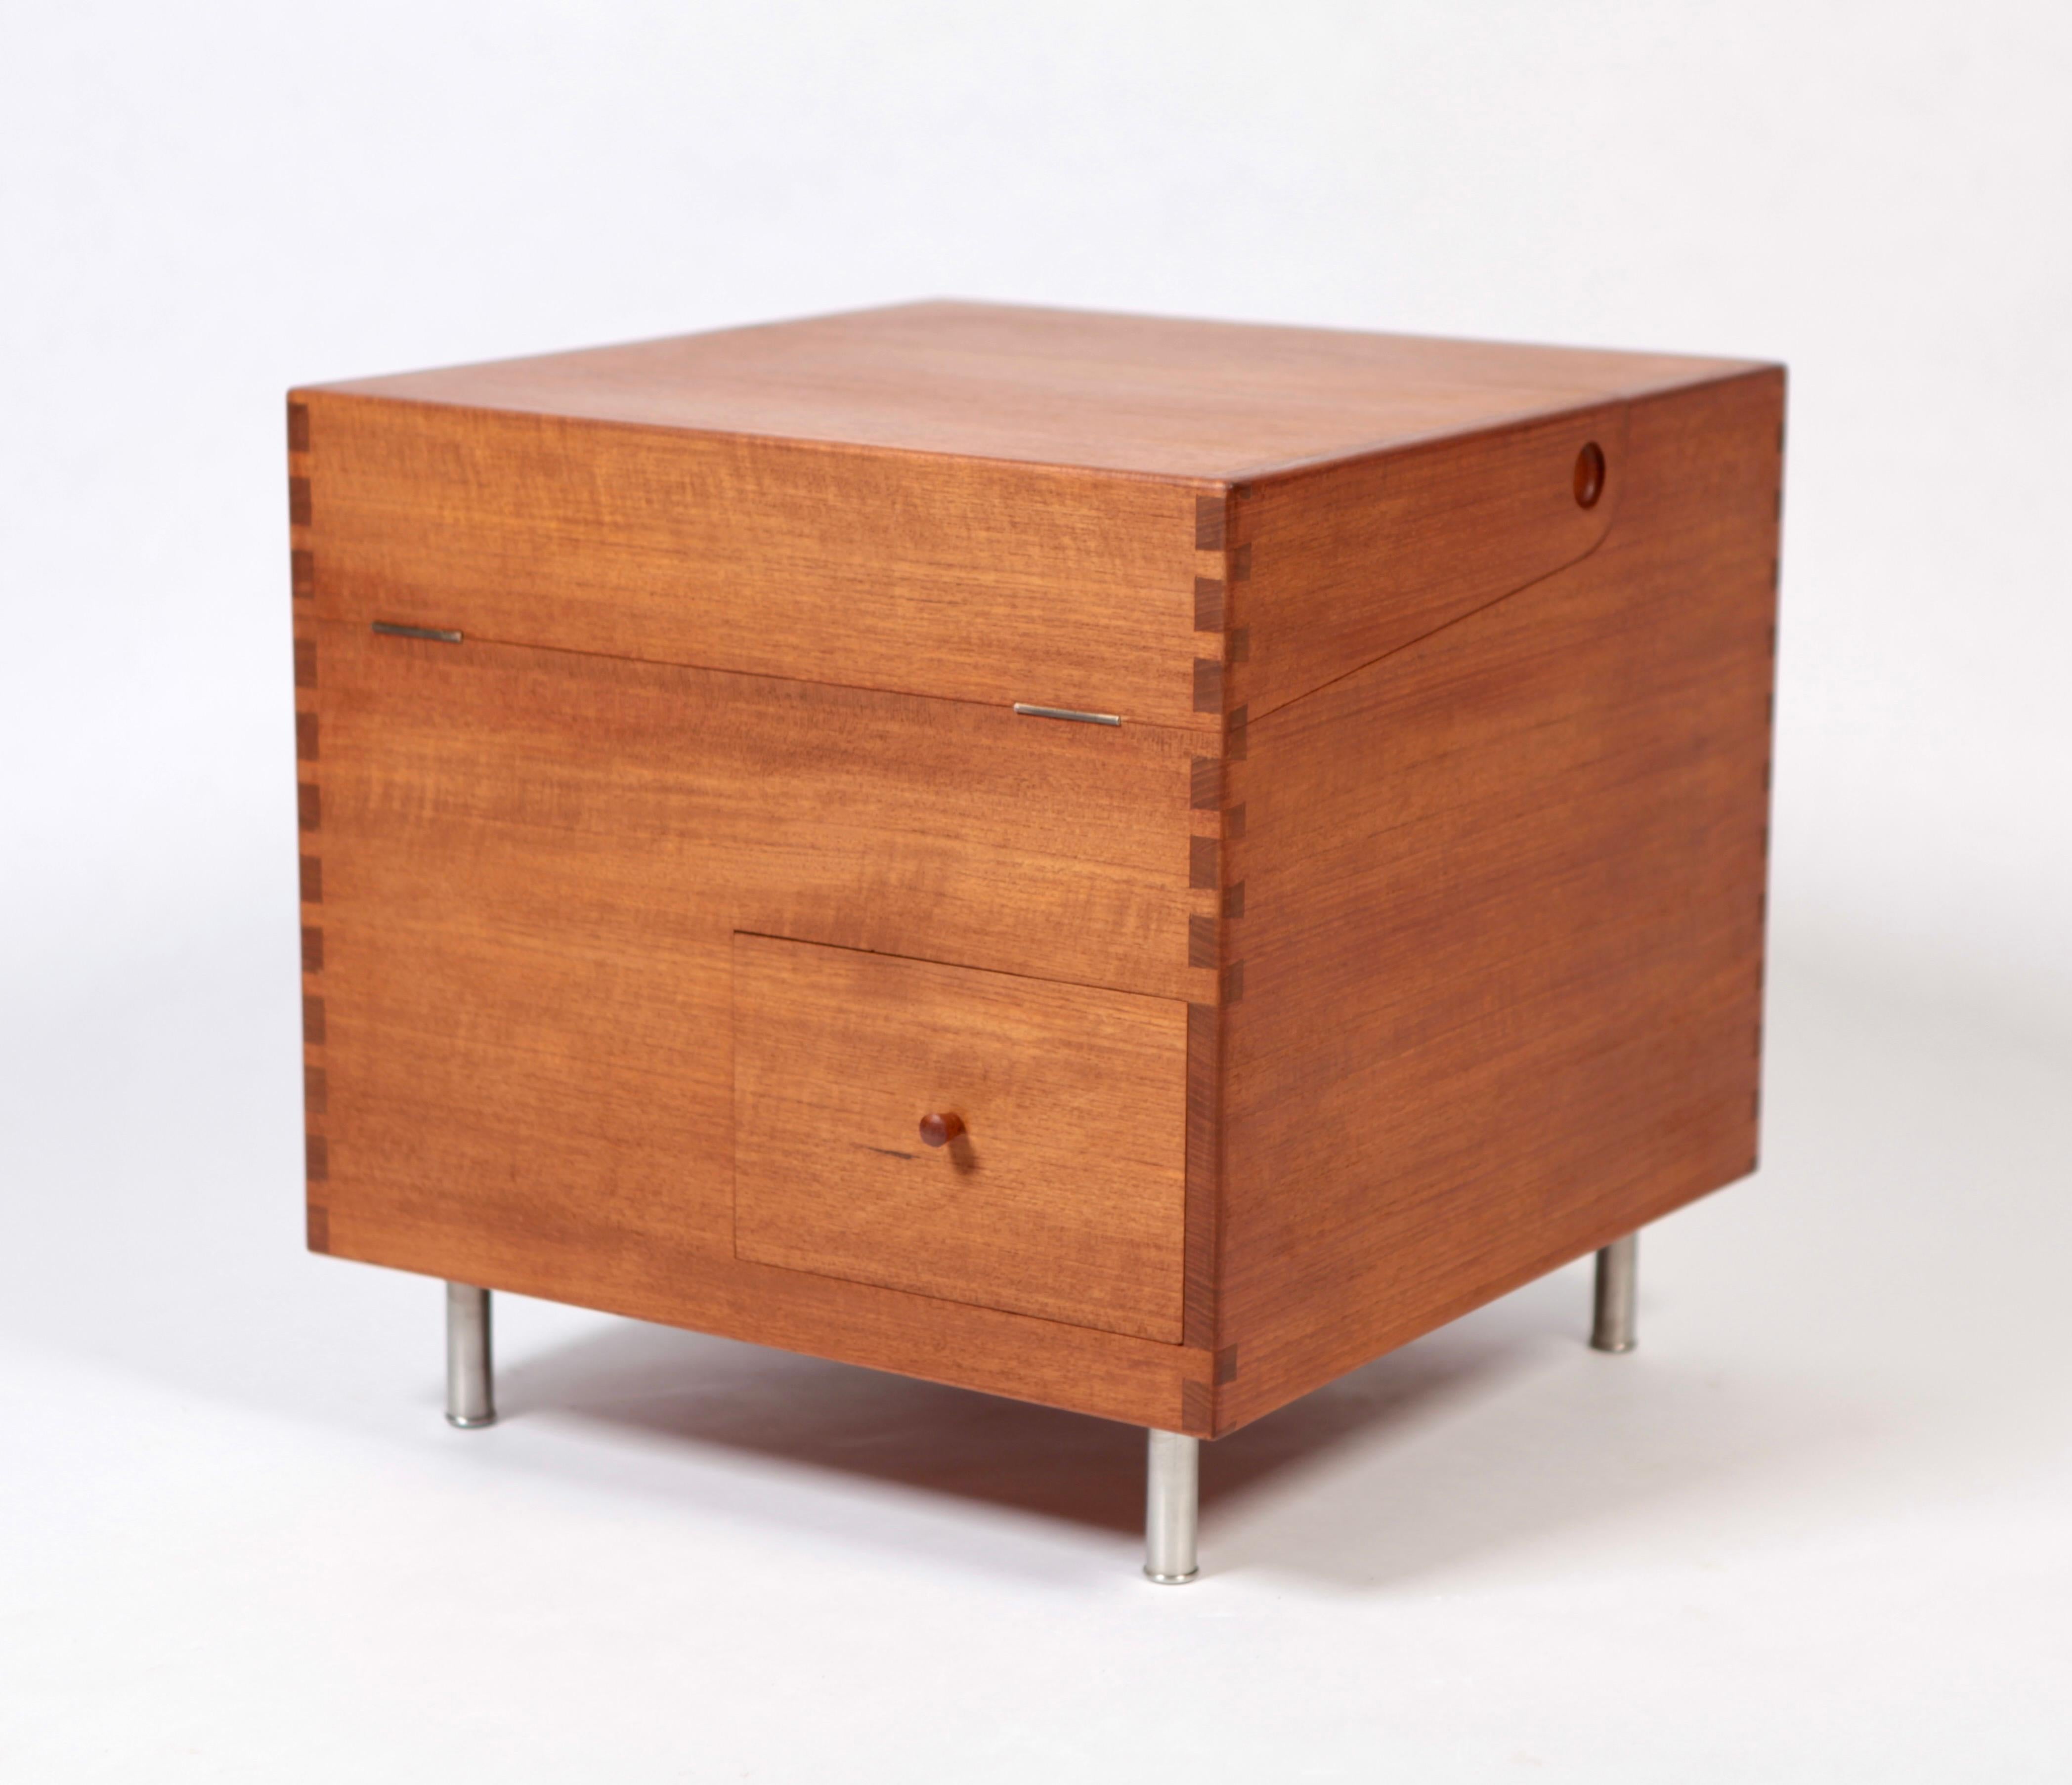 Minibar, model AT34, designed by Hans Wegner in 1959 and manufactured by cabinetmaker Andreas Tuck in Denmark.
Made of teak, original Formica shelf and steel legs, one drawer.
Signed to the underside.
This timeless masterpiece is in excellent